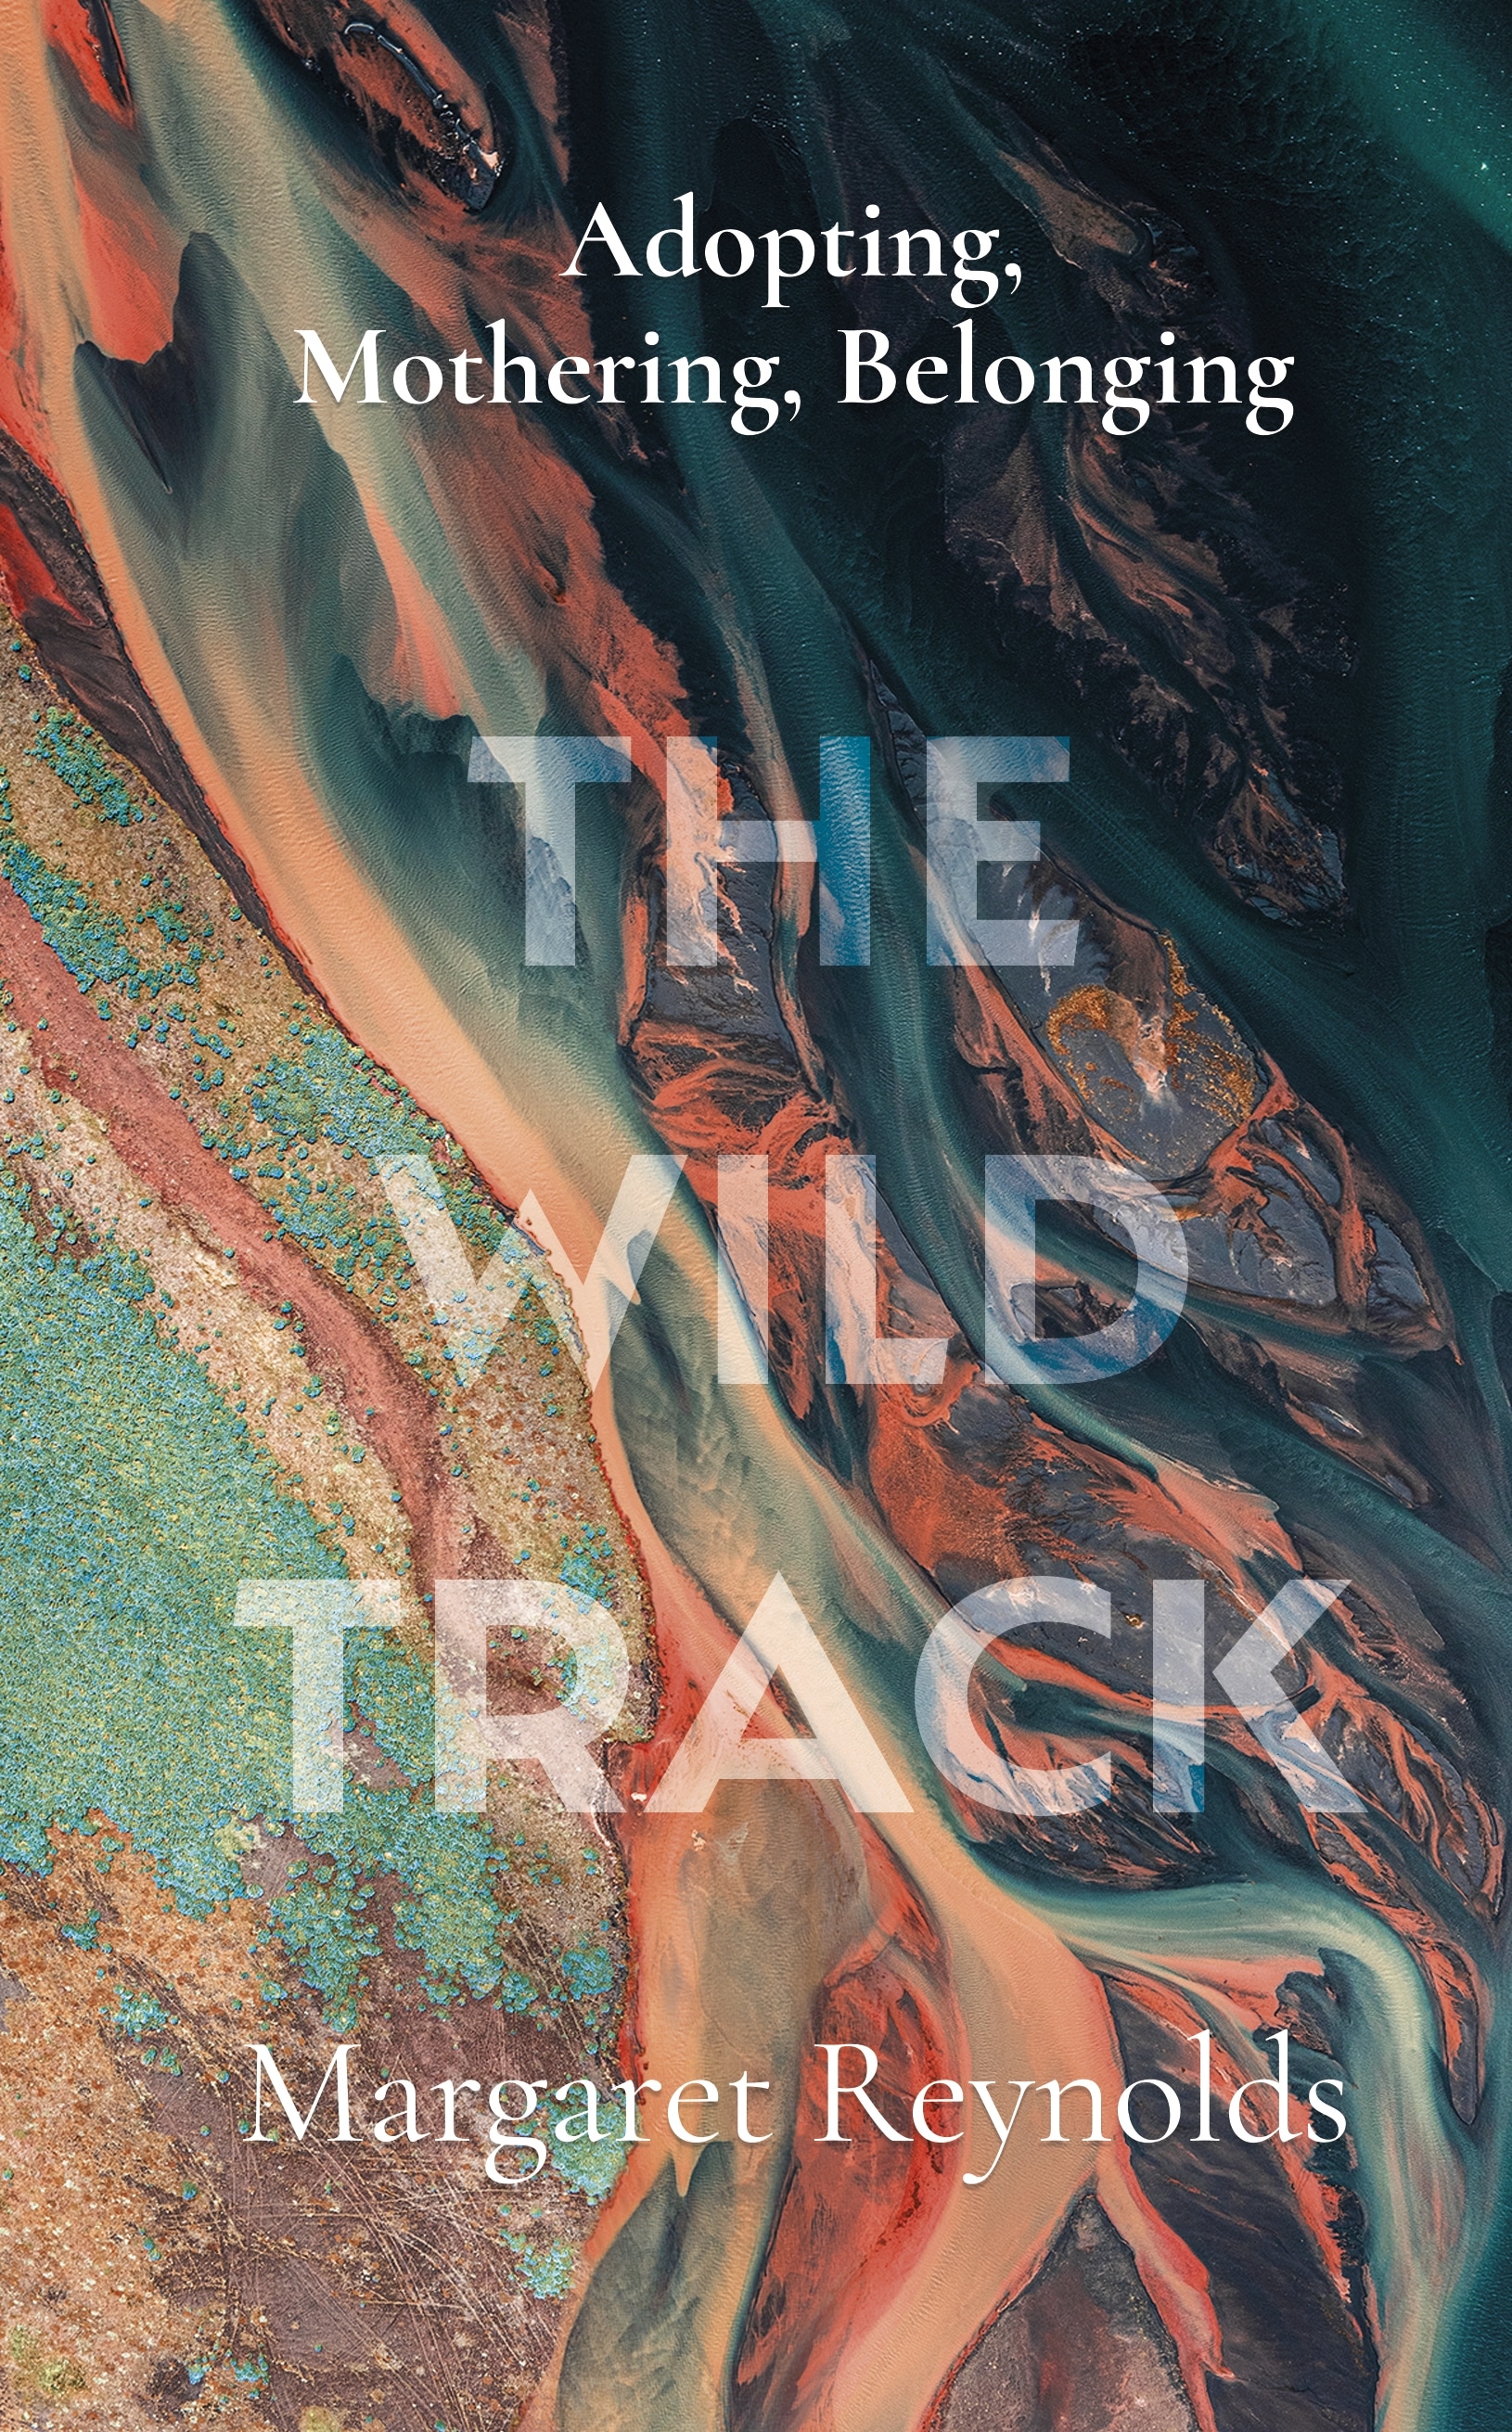 Book “The Wild Track” by Margaret Reynolds — February 25, 2021